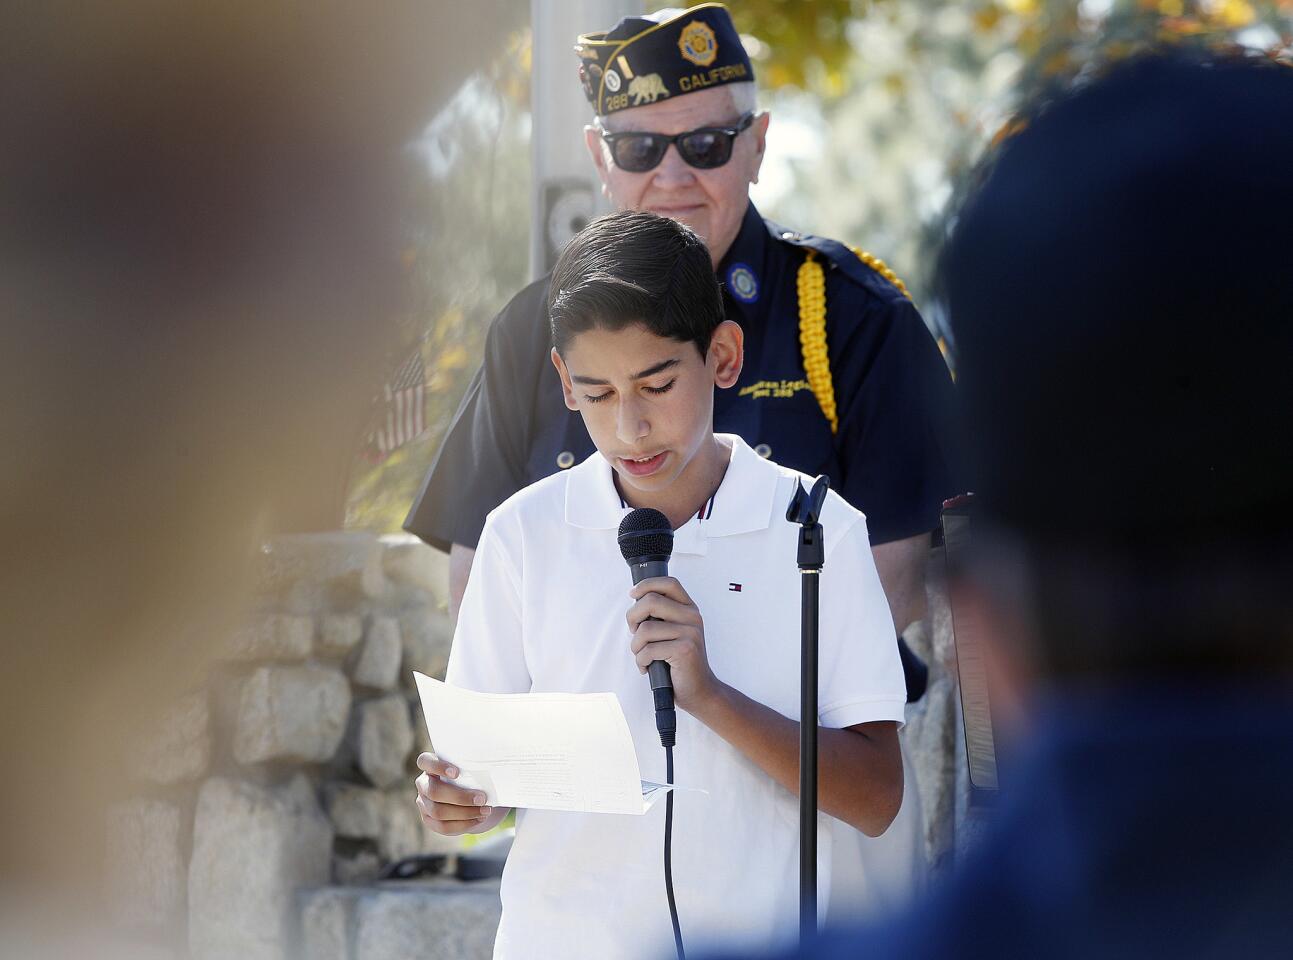 Photo Gallery: Veteran's Day to recognize local veterans and remember the Armistice